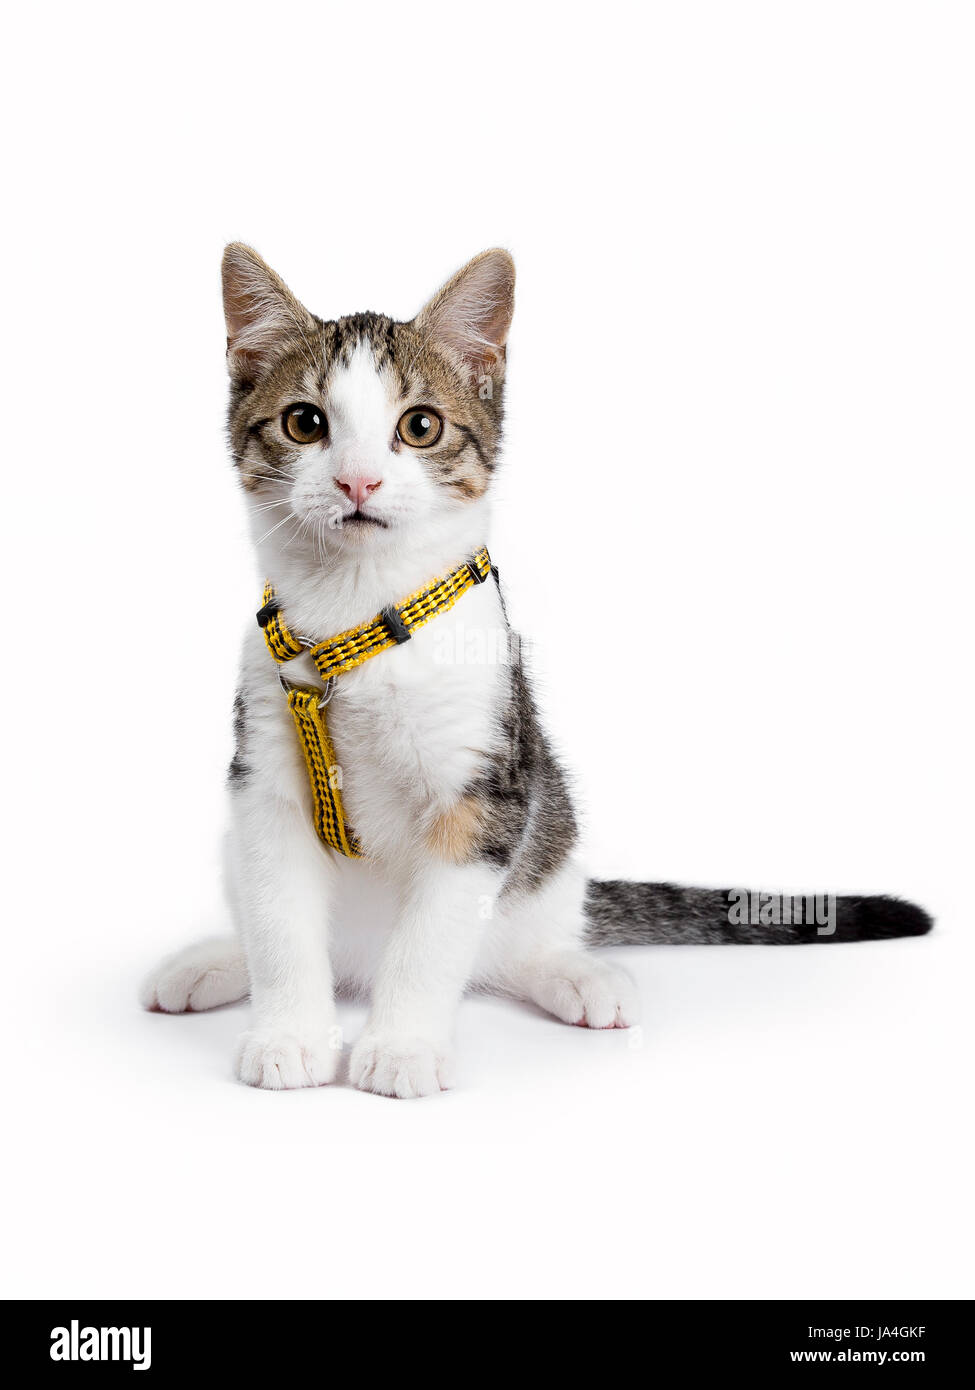 European shorthair kitten / cat sitting on white background wearing yellow harnas and looking straight into camera Stock Photo